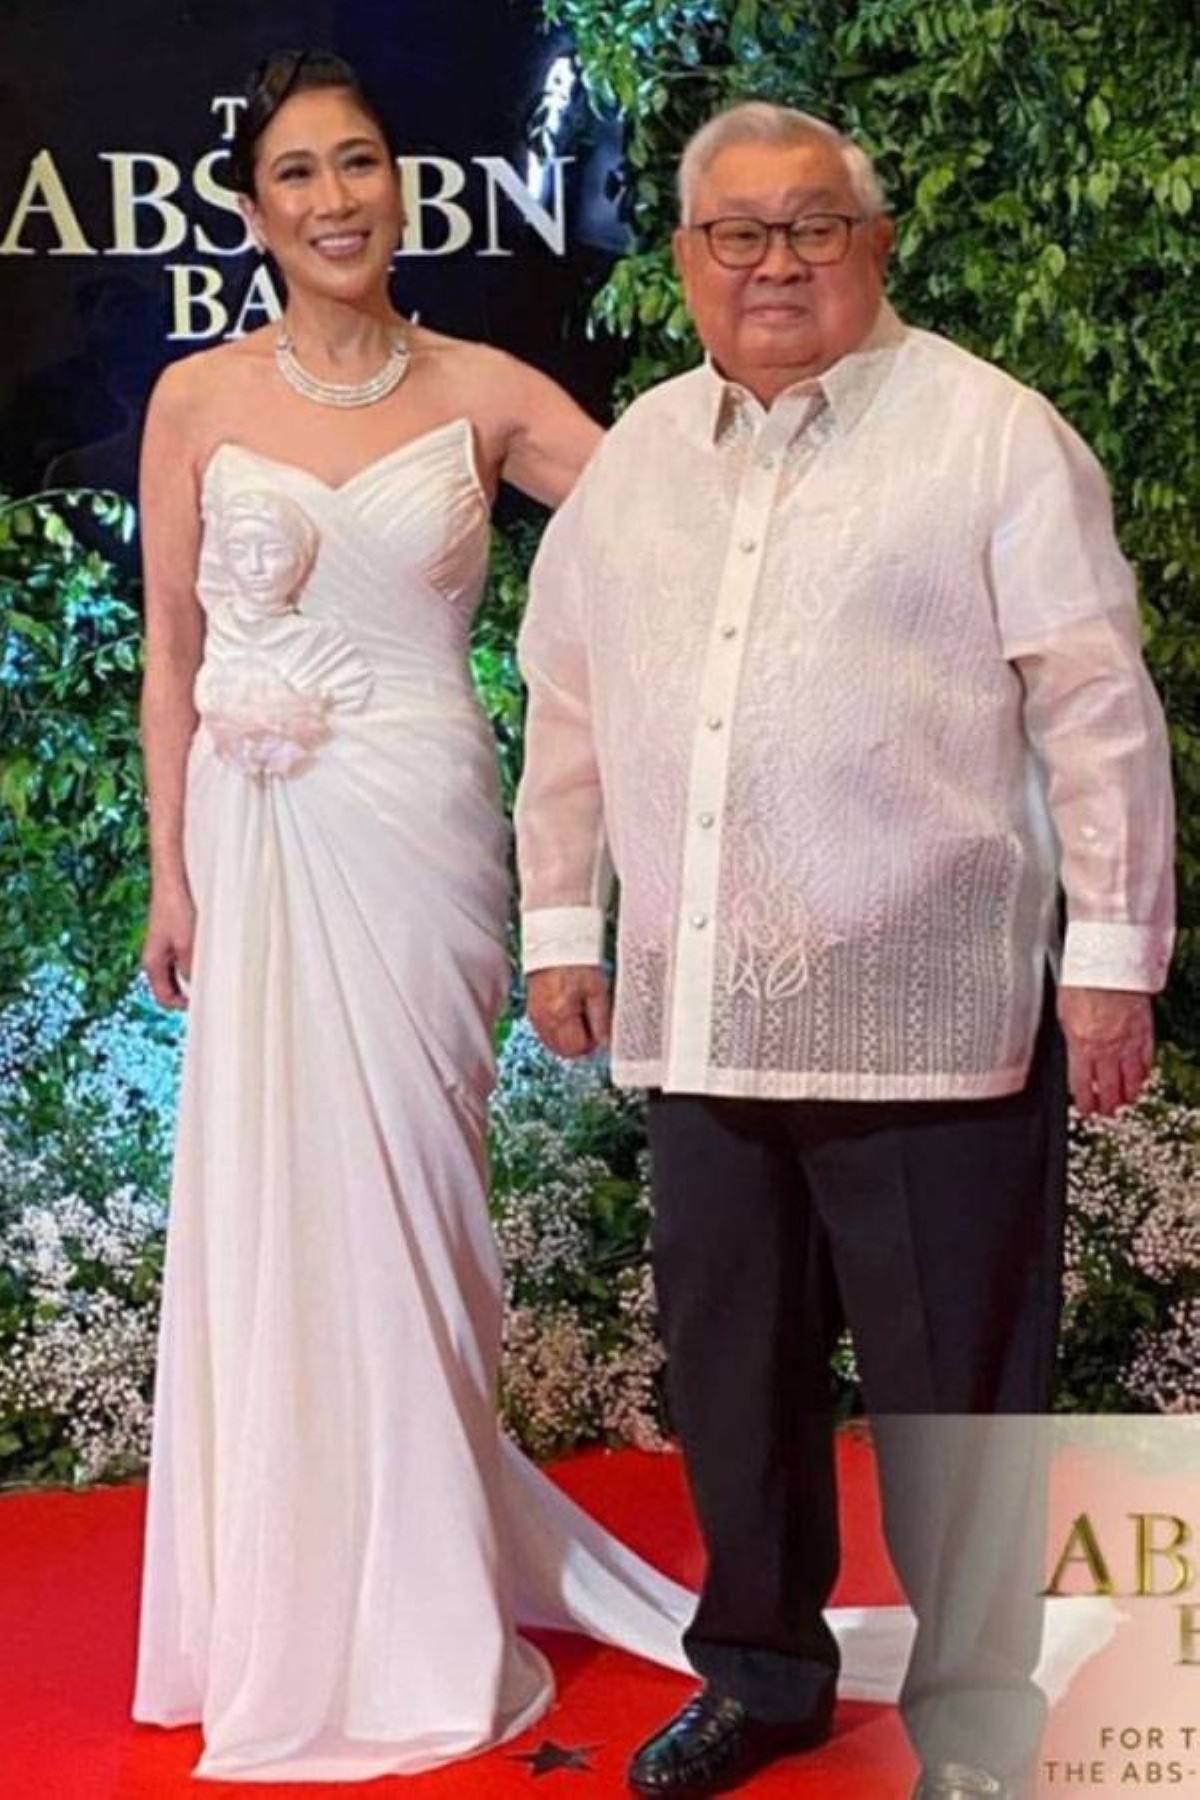 Besides the stunning looks of Kapamilya stars, another bright and shining moment was the show of support of GMA Network leaders, Felipe Gozon and Annette Gozon-Valdes. INSTAGRAM PHOTOS/ABSCBN, NICEPRINTPHOTO